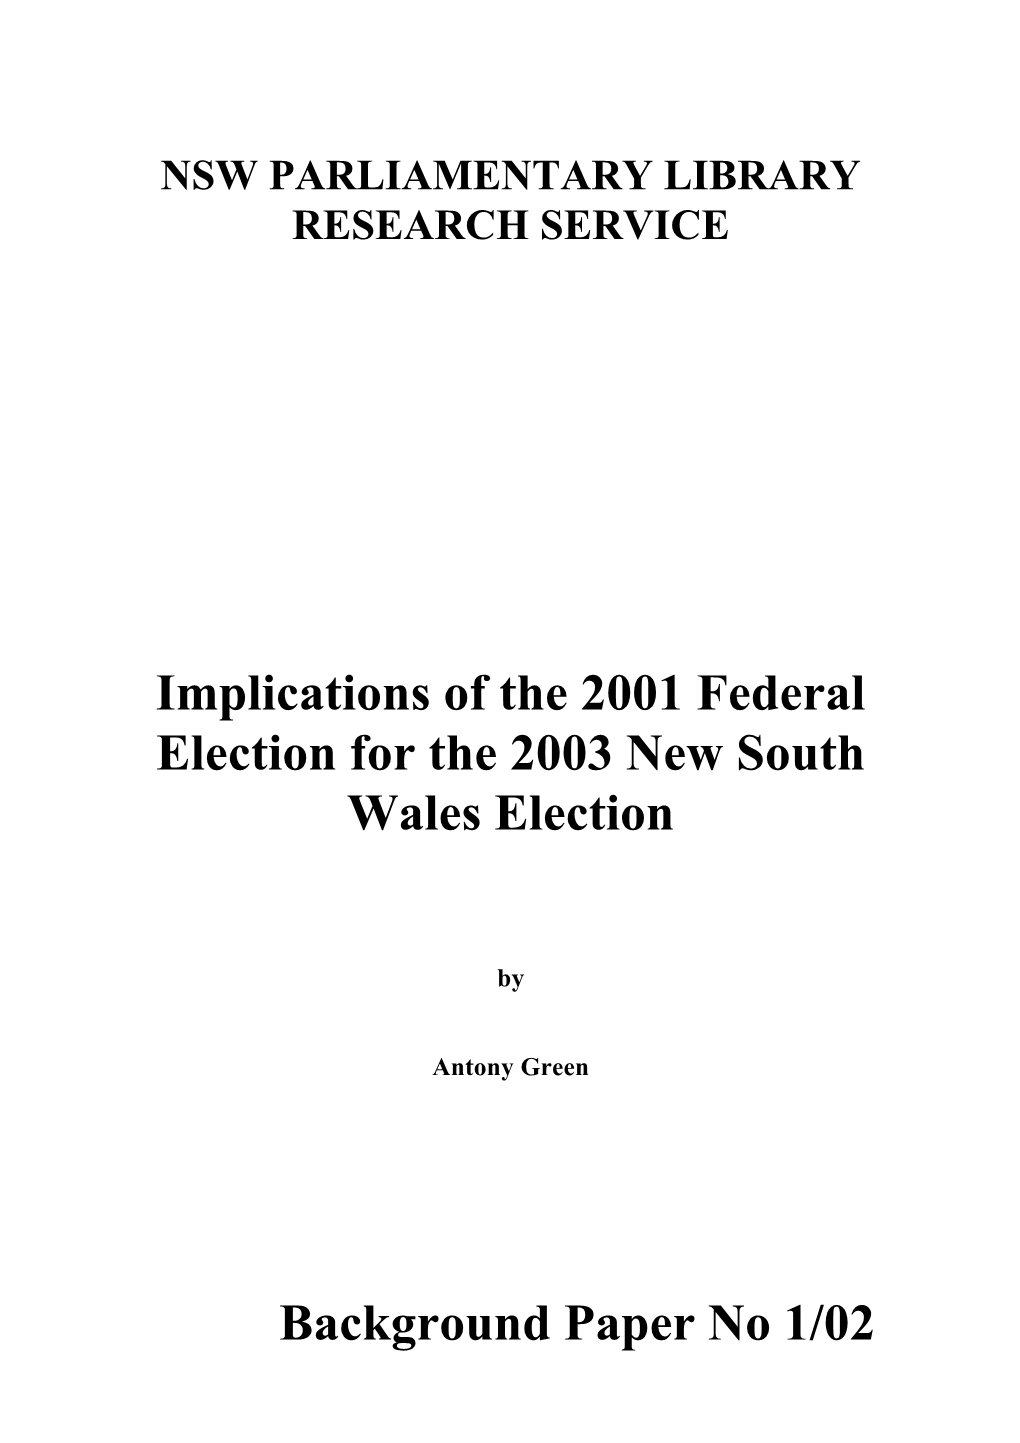 Implications of the 2001 Federal Election for the 2003 New South Wales Election